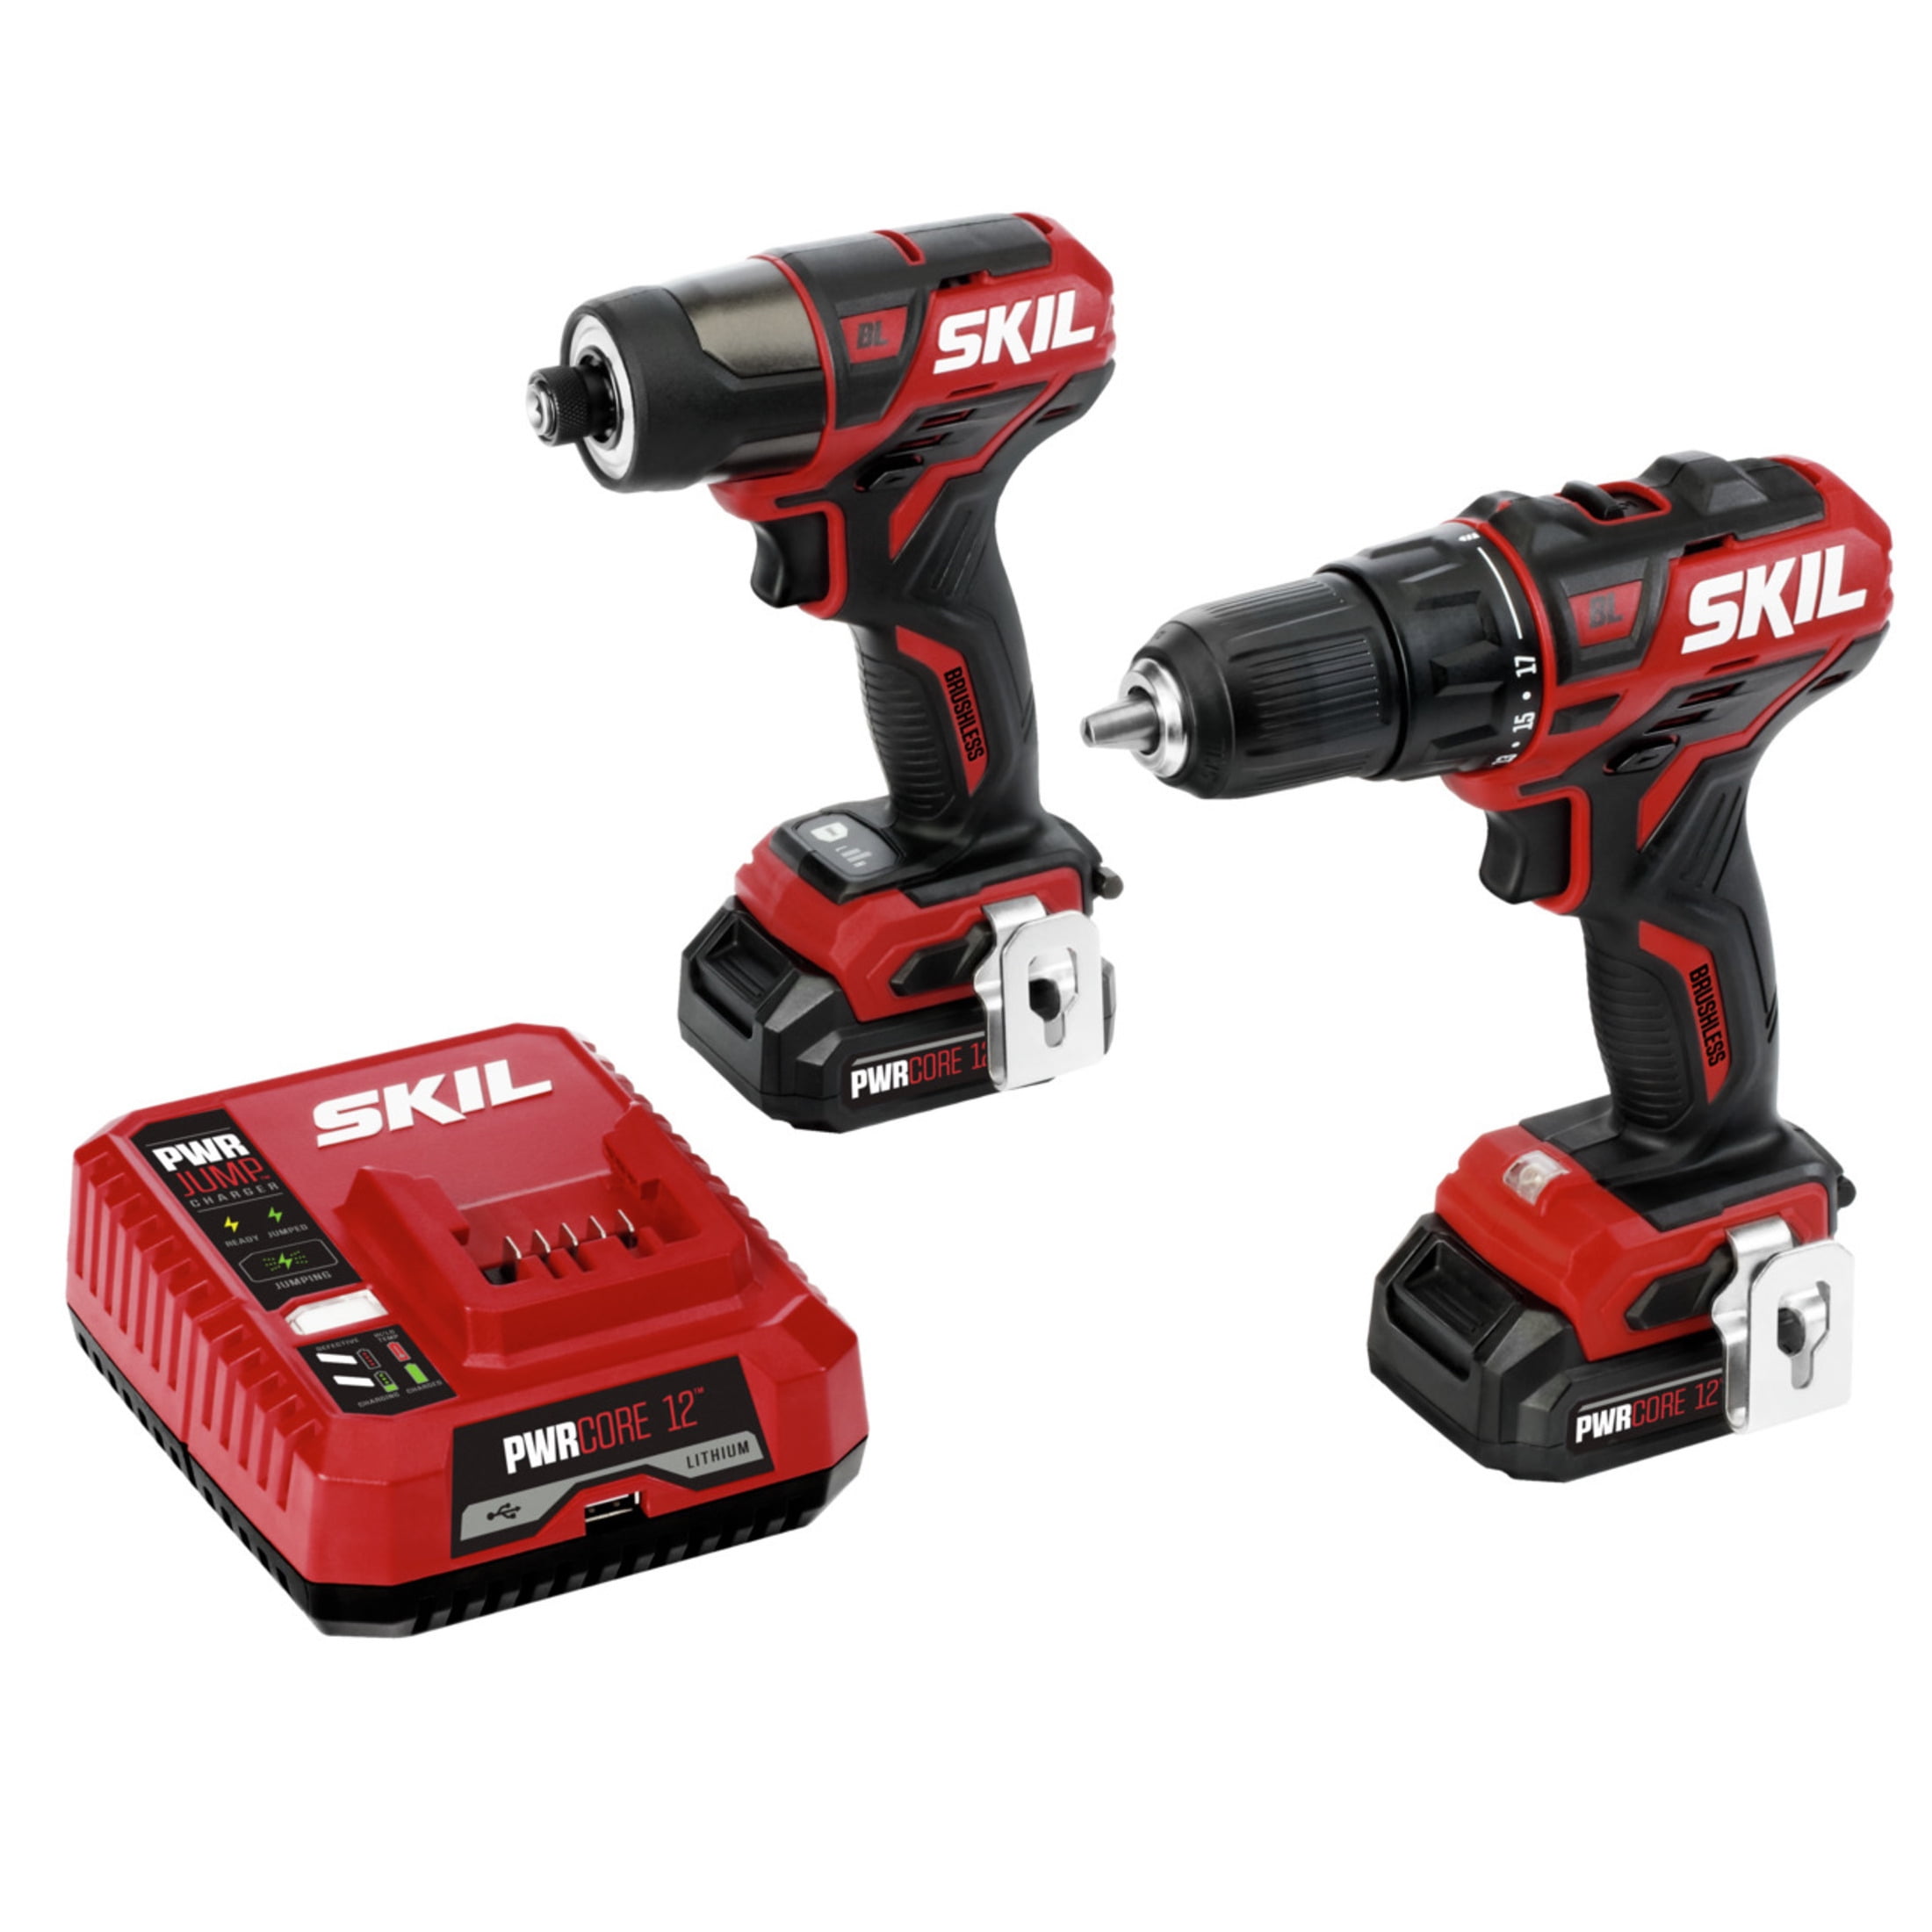 SKIL PWR Core 12 Brushless 12 Volt Cordless Drill Driver & Impact Driver Kit Set with two 2.0Ah Batteries & PWR JUMP Charger